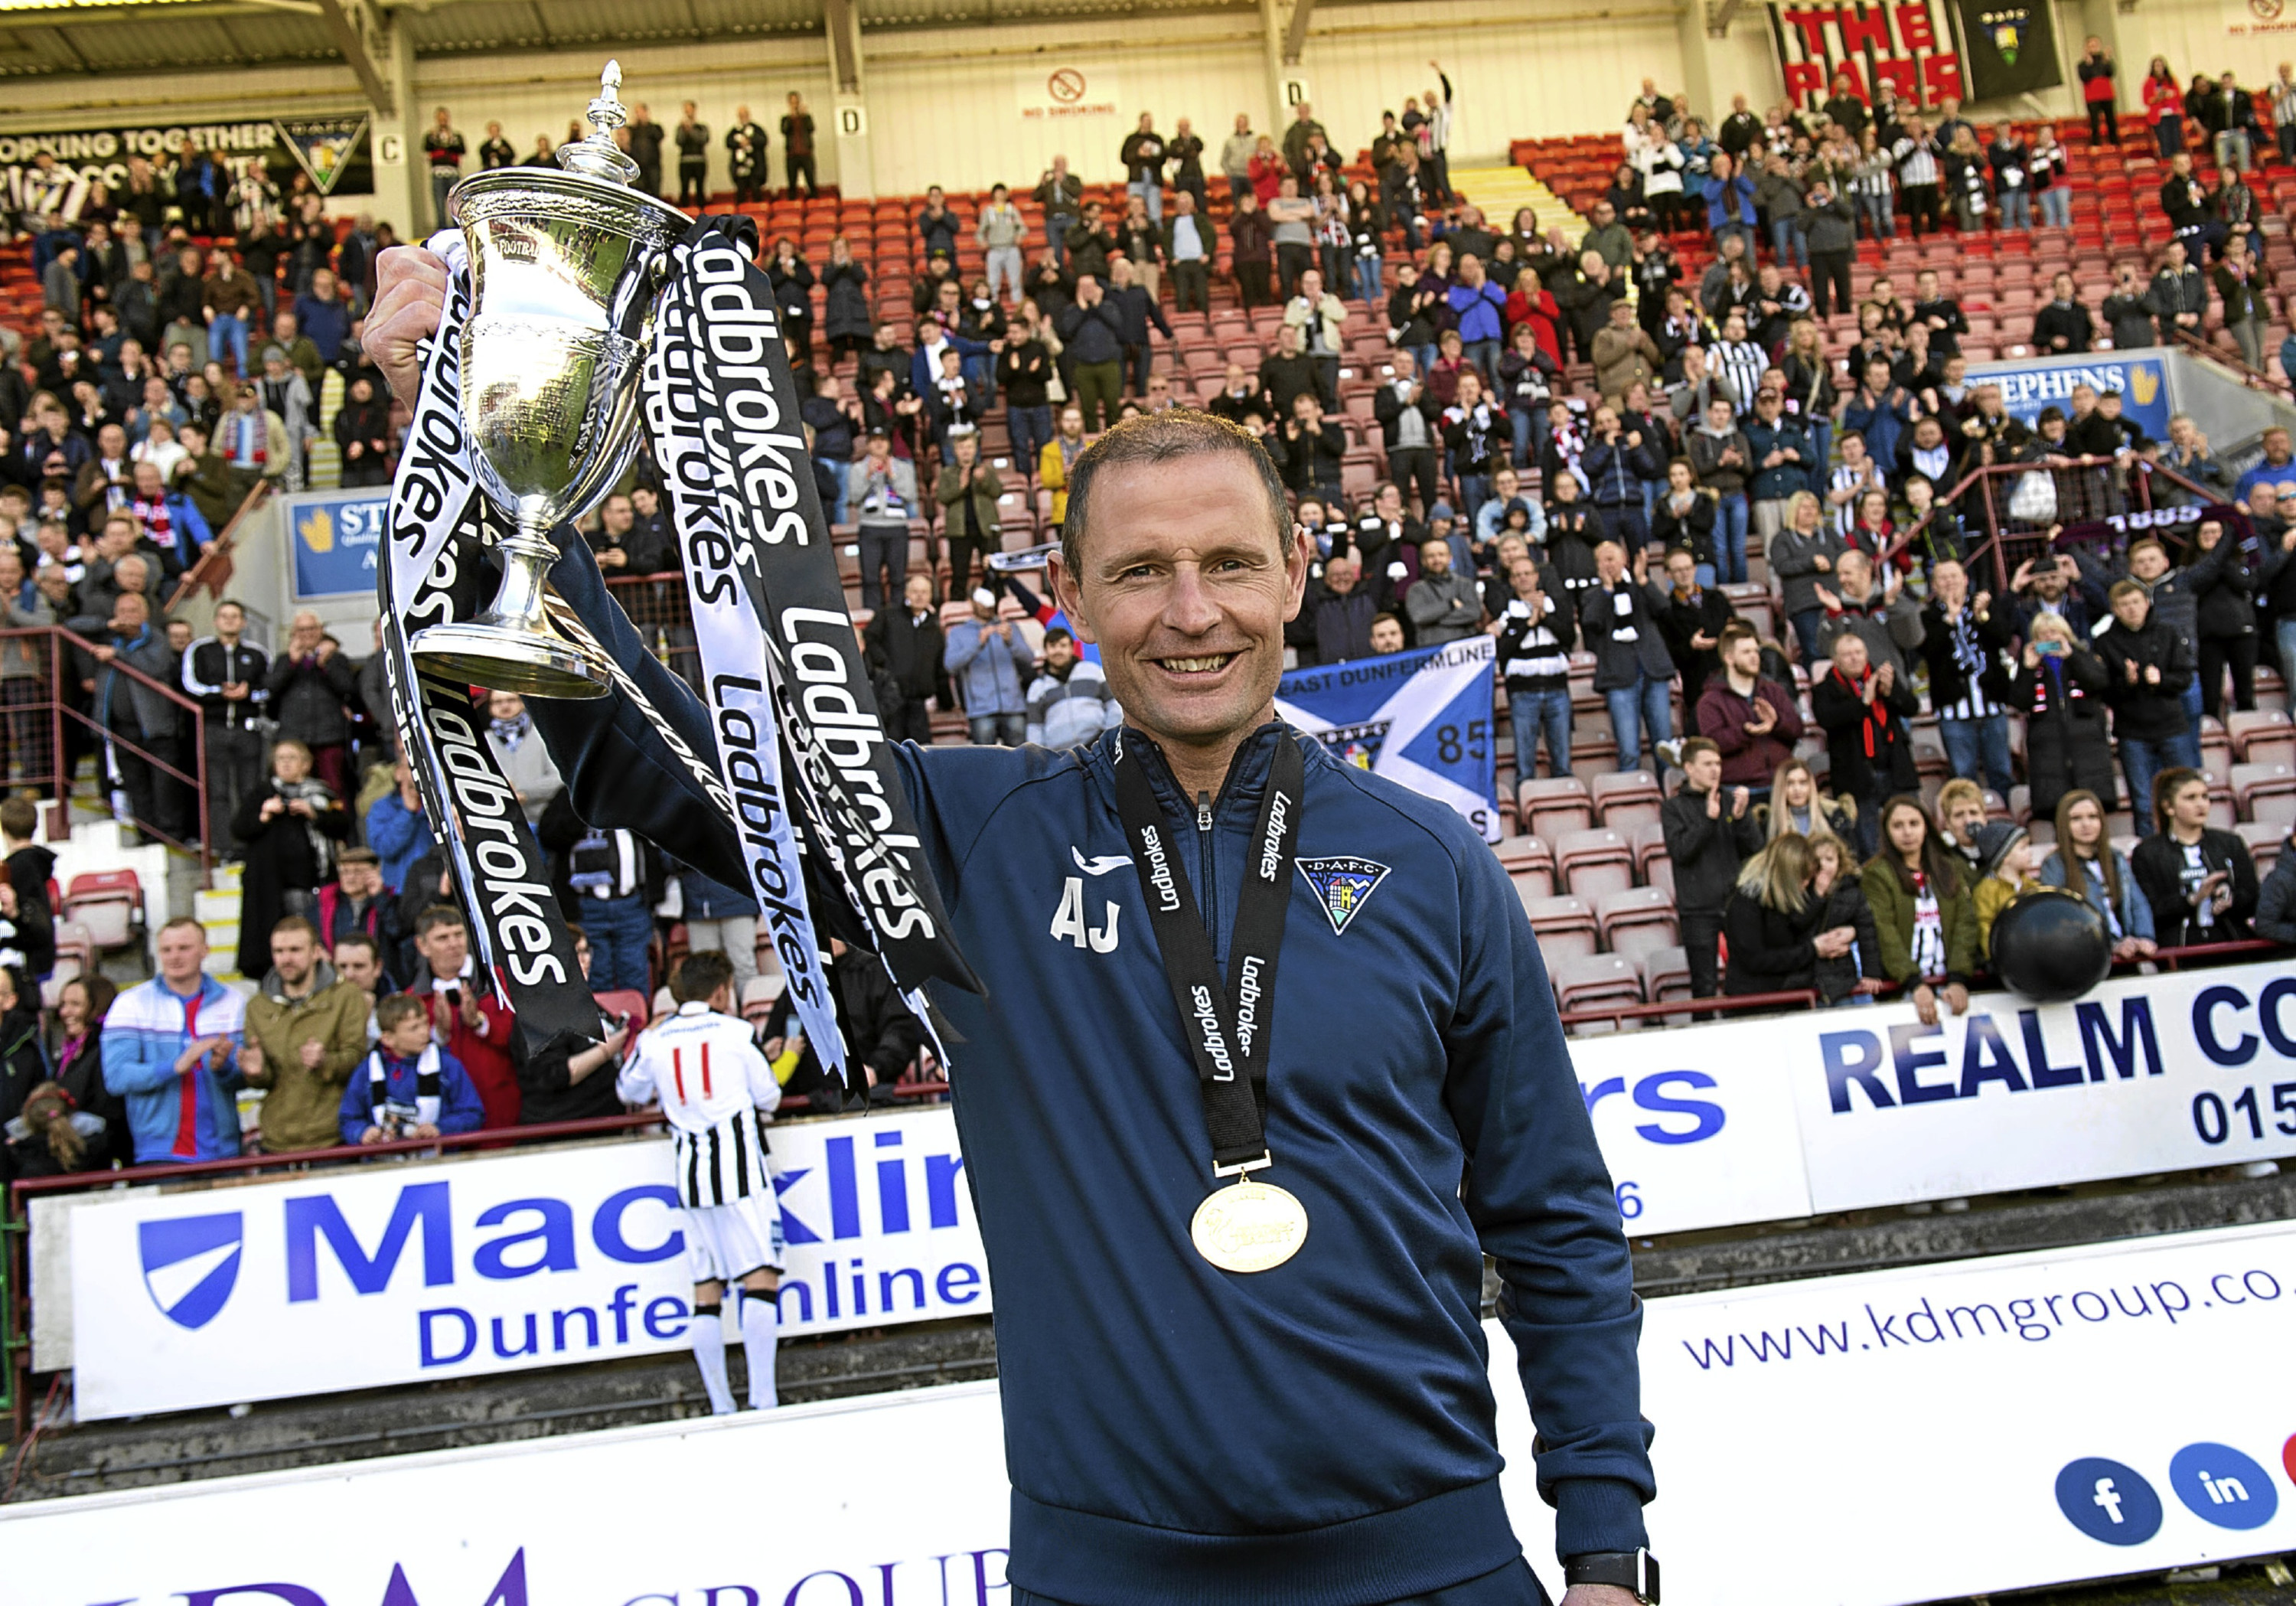 Dunfermline manager Allan Johnston with the Ladbrokes League One trophy